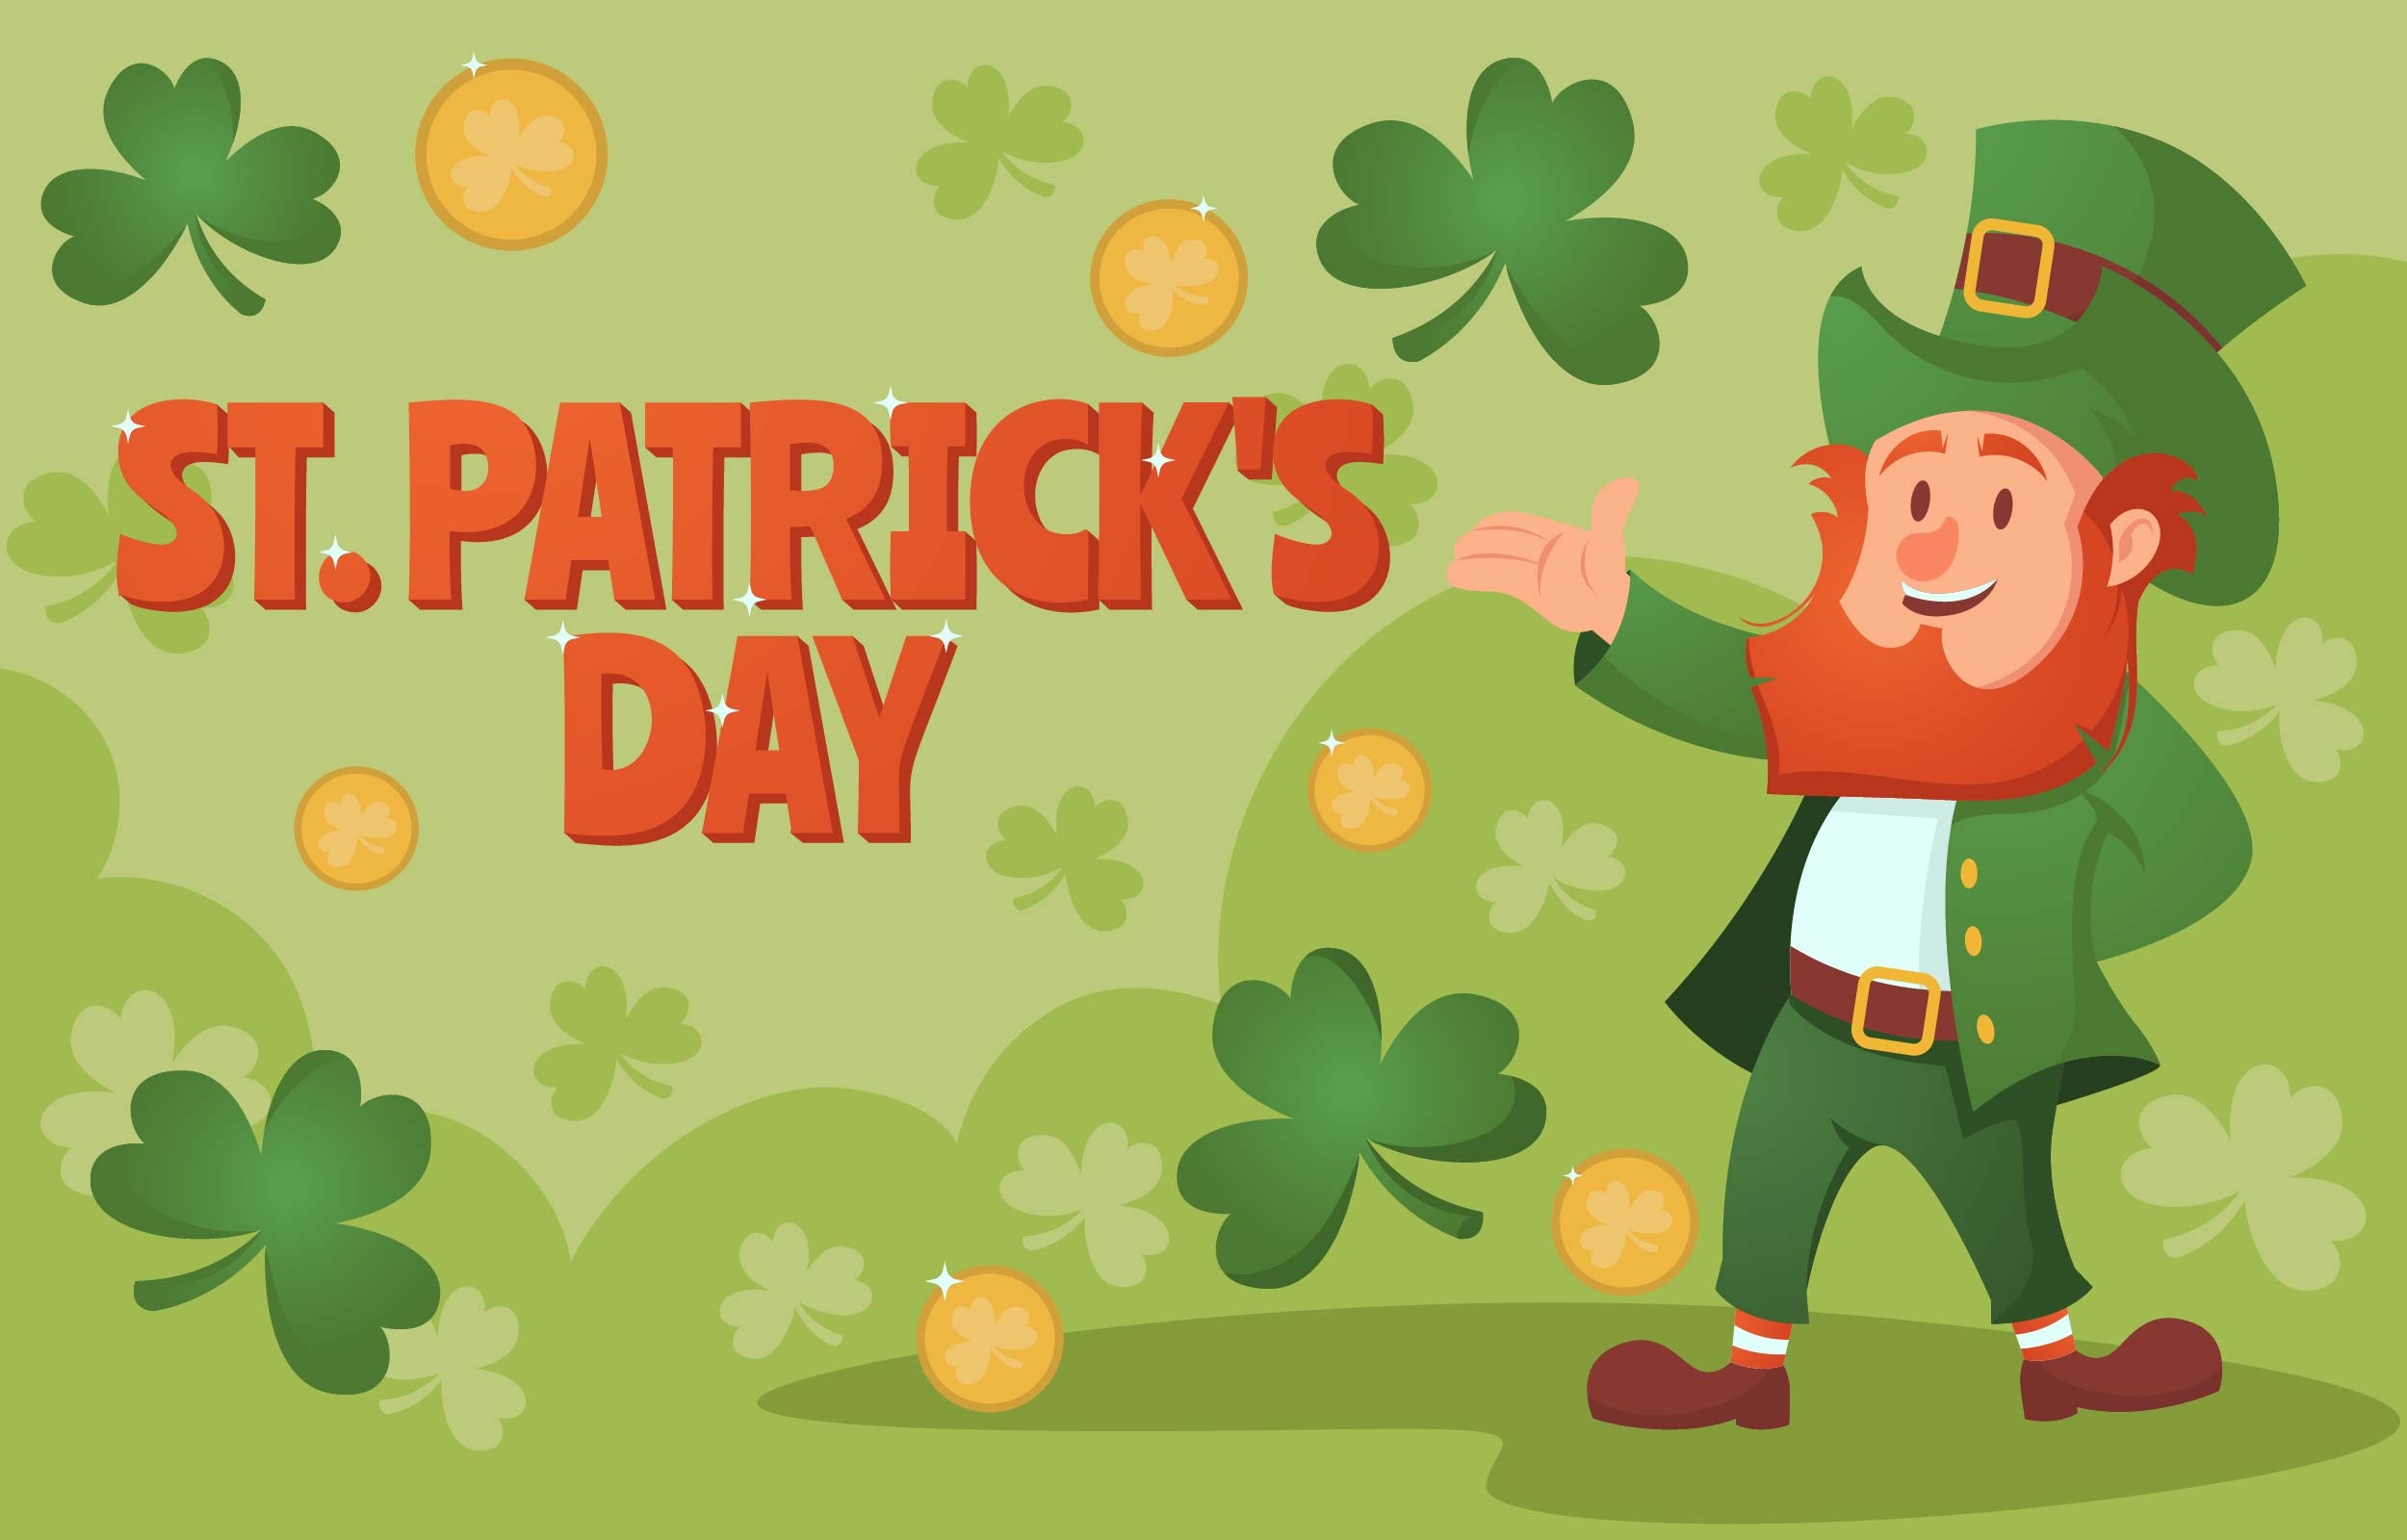 Mythical leprechaun, Magical creatures, St. Patrick's Day, Lucky charms, 2500x1600 HD Desktop